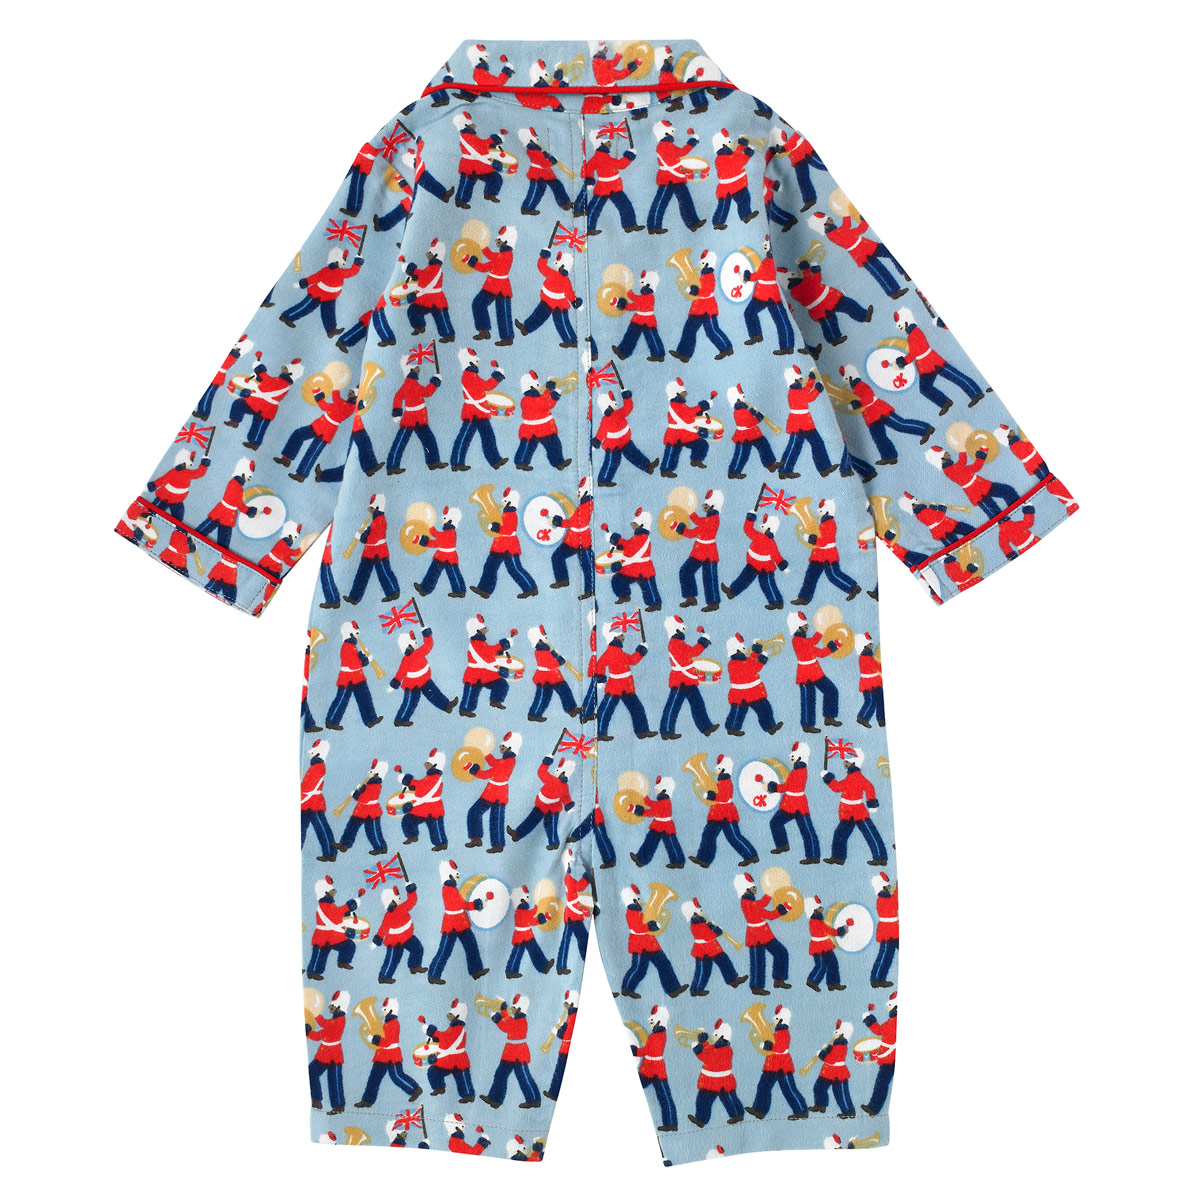 MARCHING BAND BABY WOVEN ROMPER 2.jpg